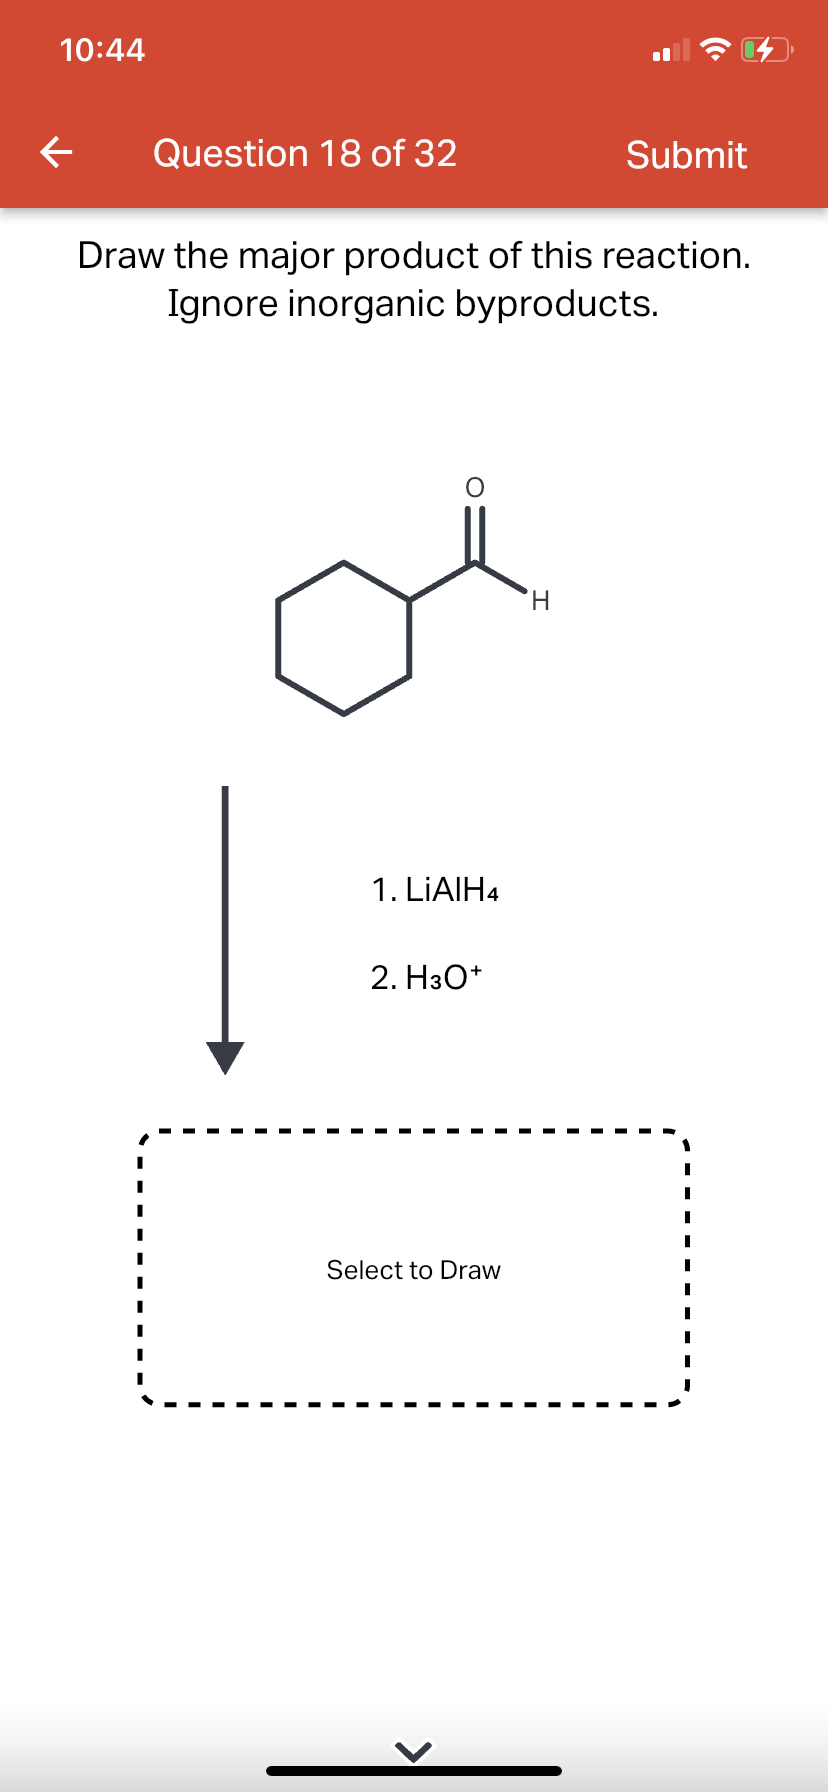 10:44
←
Question 18 of 32
Draw the major product of this reaction.
Ignore inorganic byproducts.
1. LiAlH4
2. H3O+
Select to Draw
Submit
H